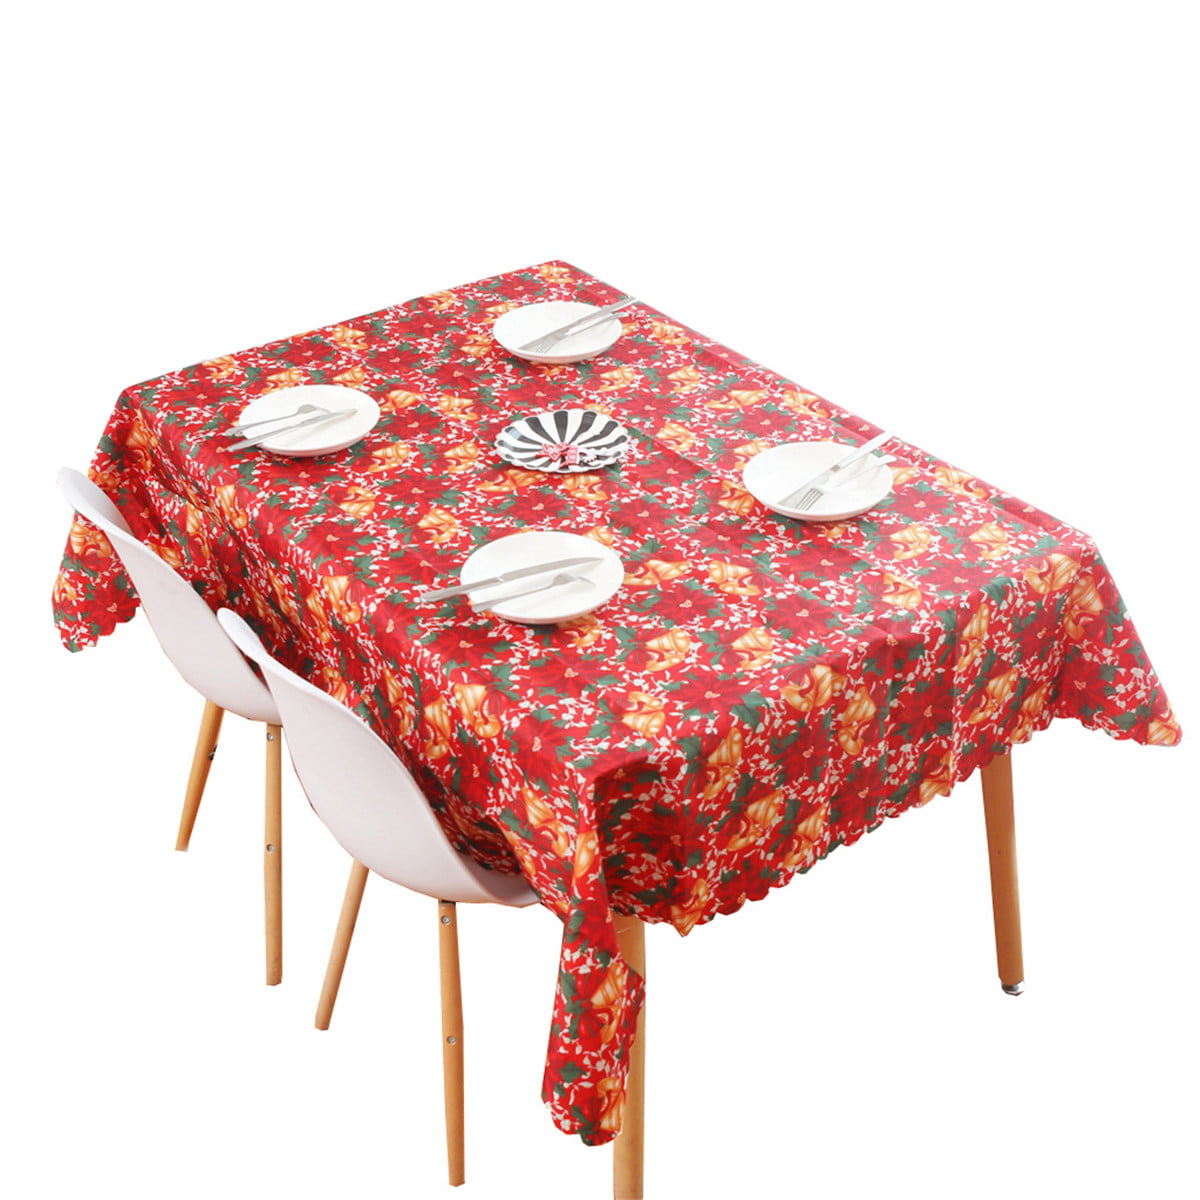 Tree Gifts Snowflake Snowman Bells Reindeer Elk Oblong Tablecloth for Kitchen Dining Party 60x 120 Inch Winter New Year Red Background Square Round Table Cover One Bear Christmas Retangle Tablecloth